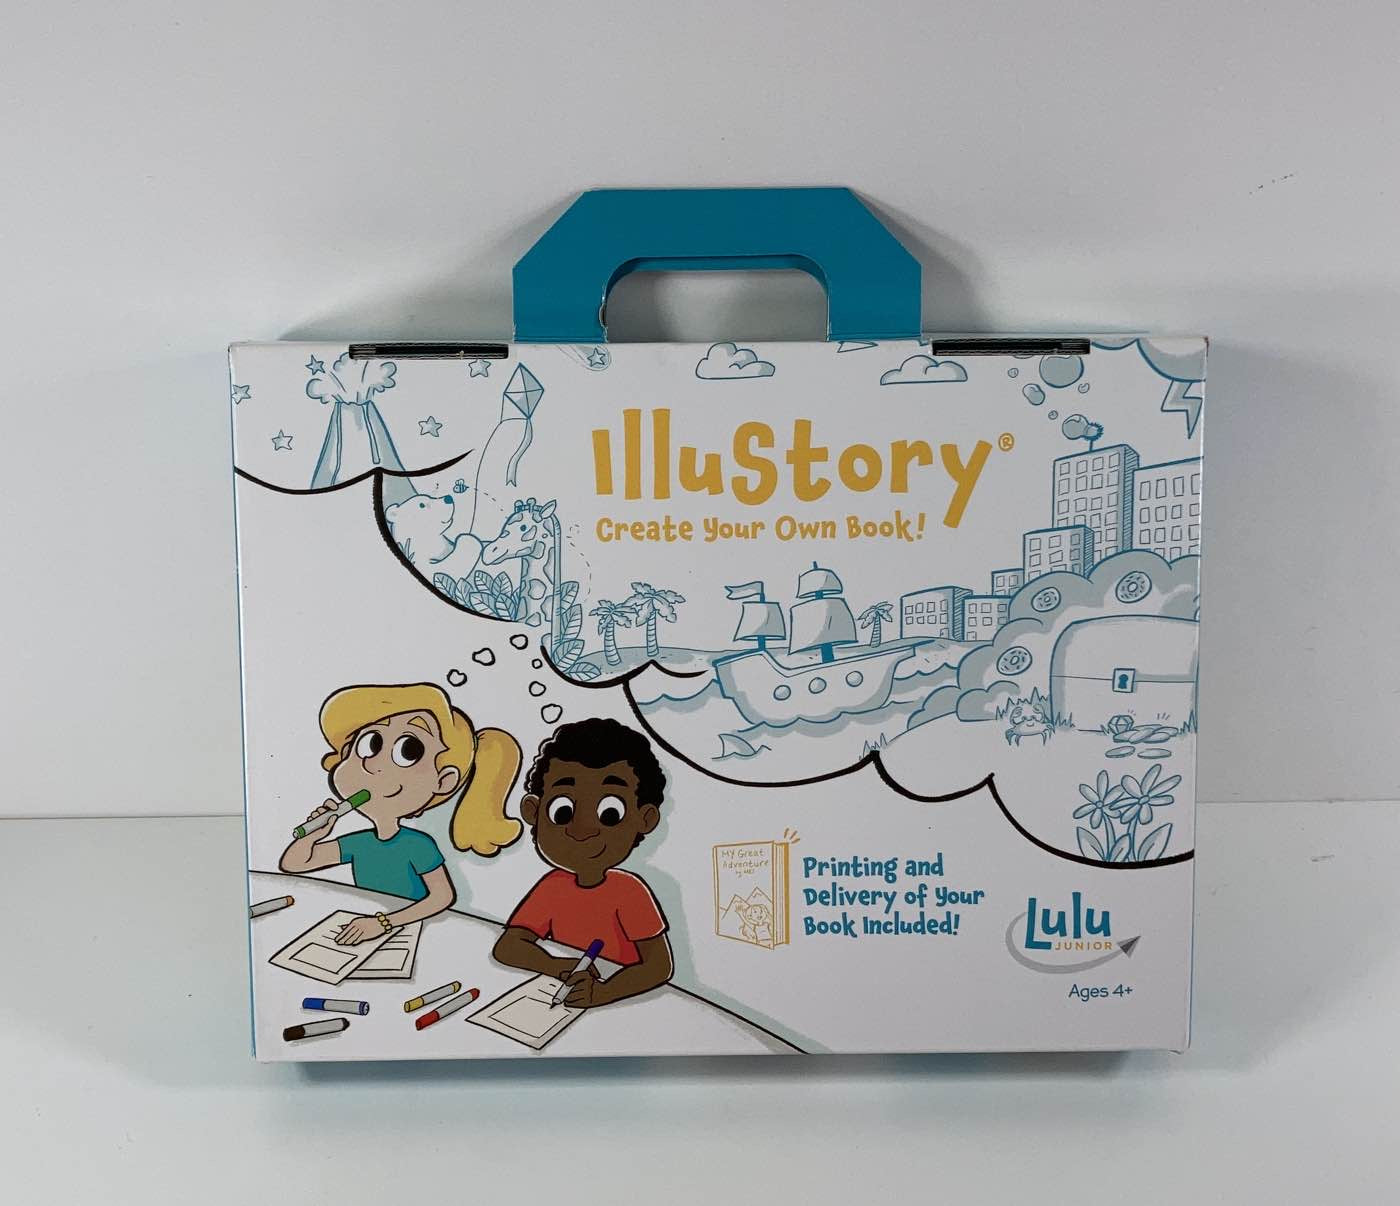 illustory - Create Your Own Book!